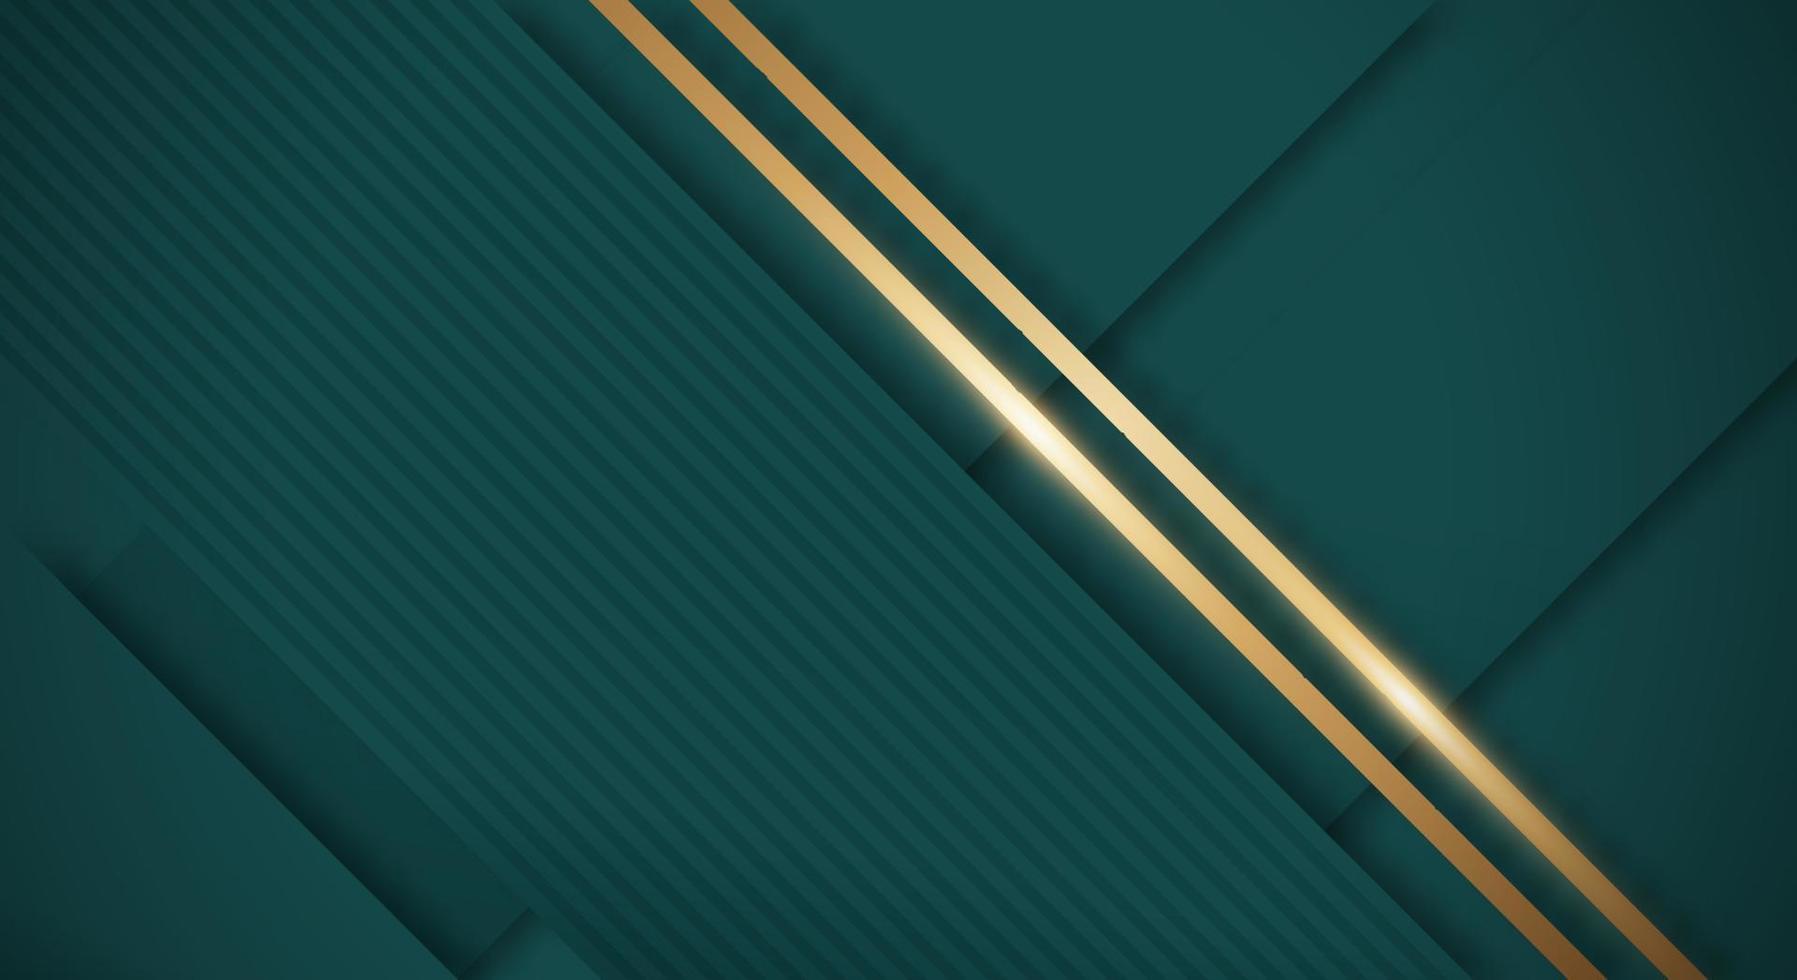 Abstract Dark Green Background with Golden Lines Luxury Strings. Geometric Backdrop with Textured Paper Layers for Business Presentation Template vector